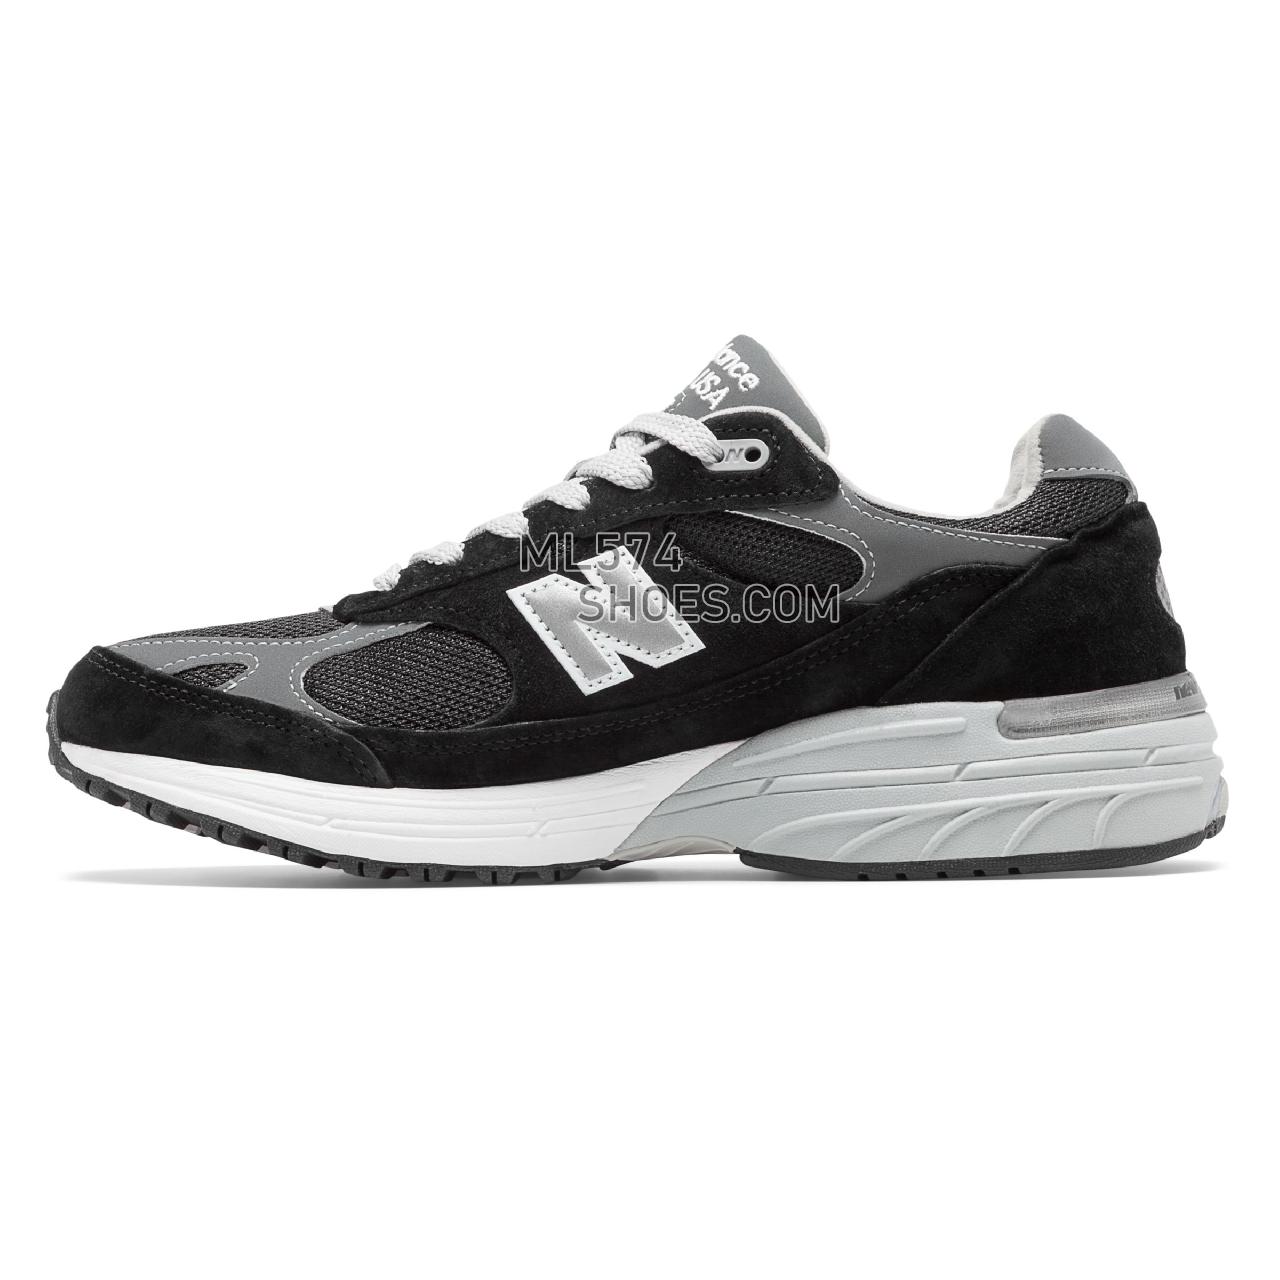 New Balance Made in US 993 - Men's Neutral Running - Black with Grey - MR993BK